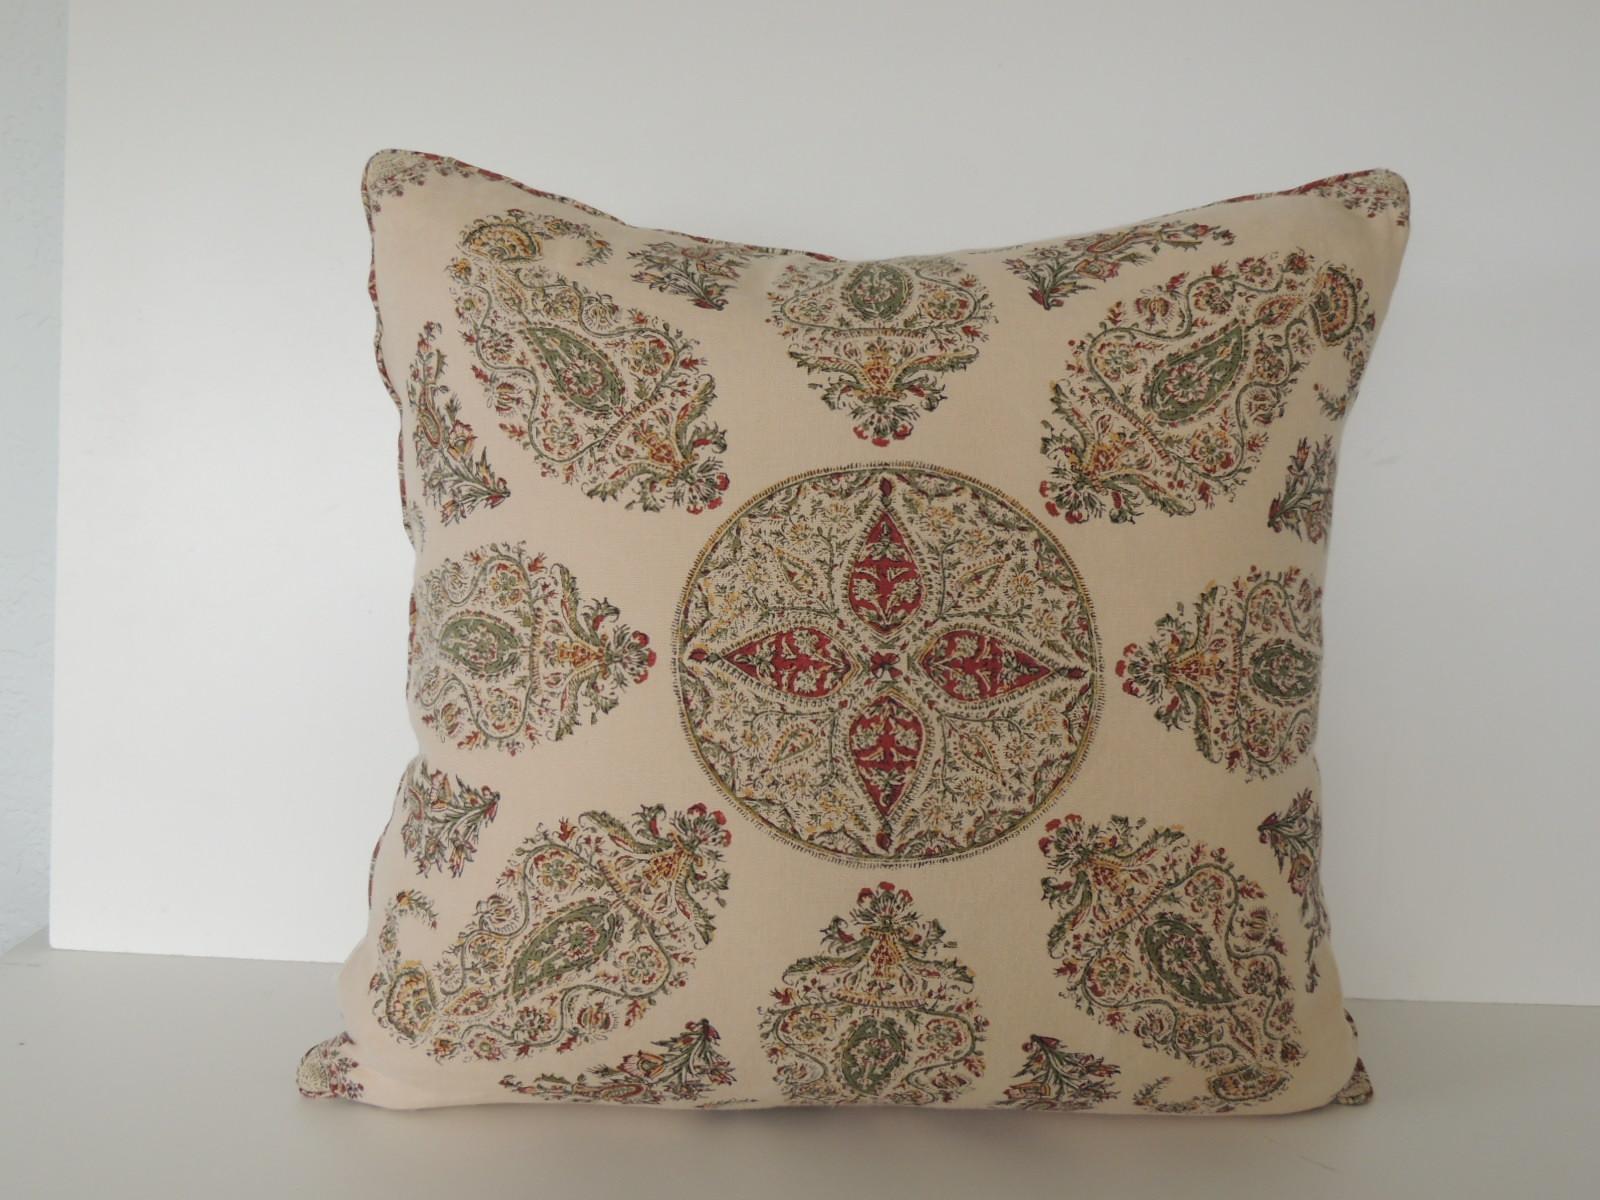 English Green and Red Linen Paisley Decorative Square Pillow with Self-Welt